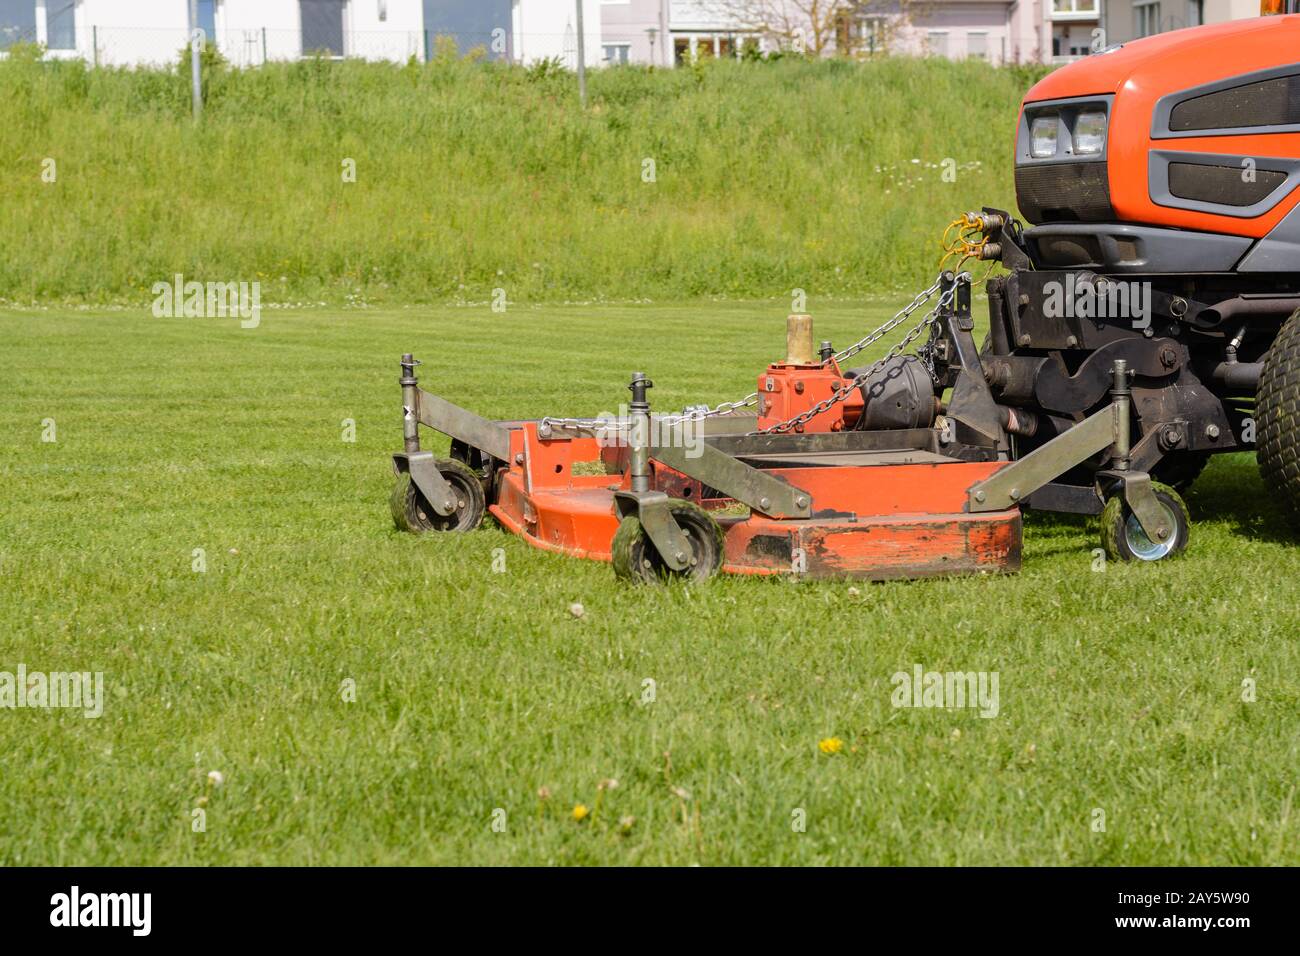 Lawn is cut with a ride-on mower - Lawn tractor Stock Photo